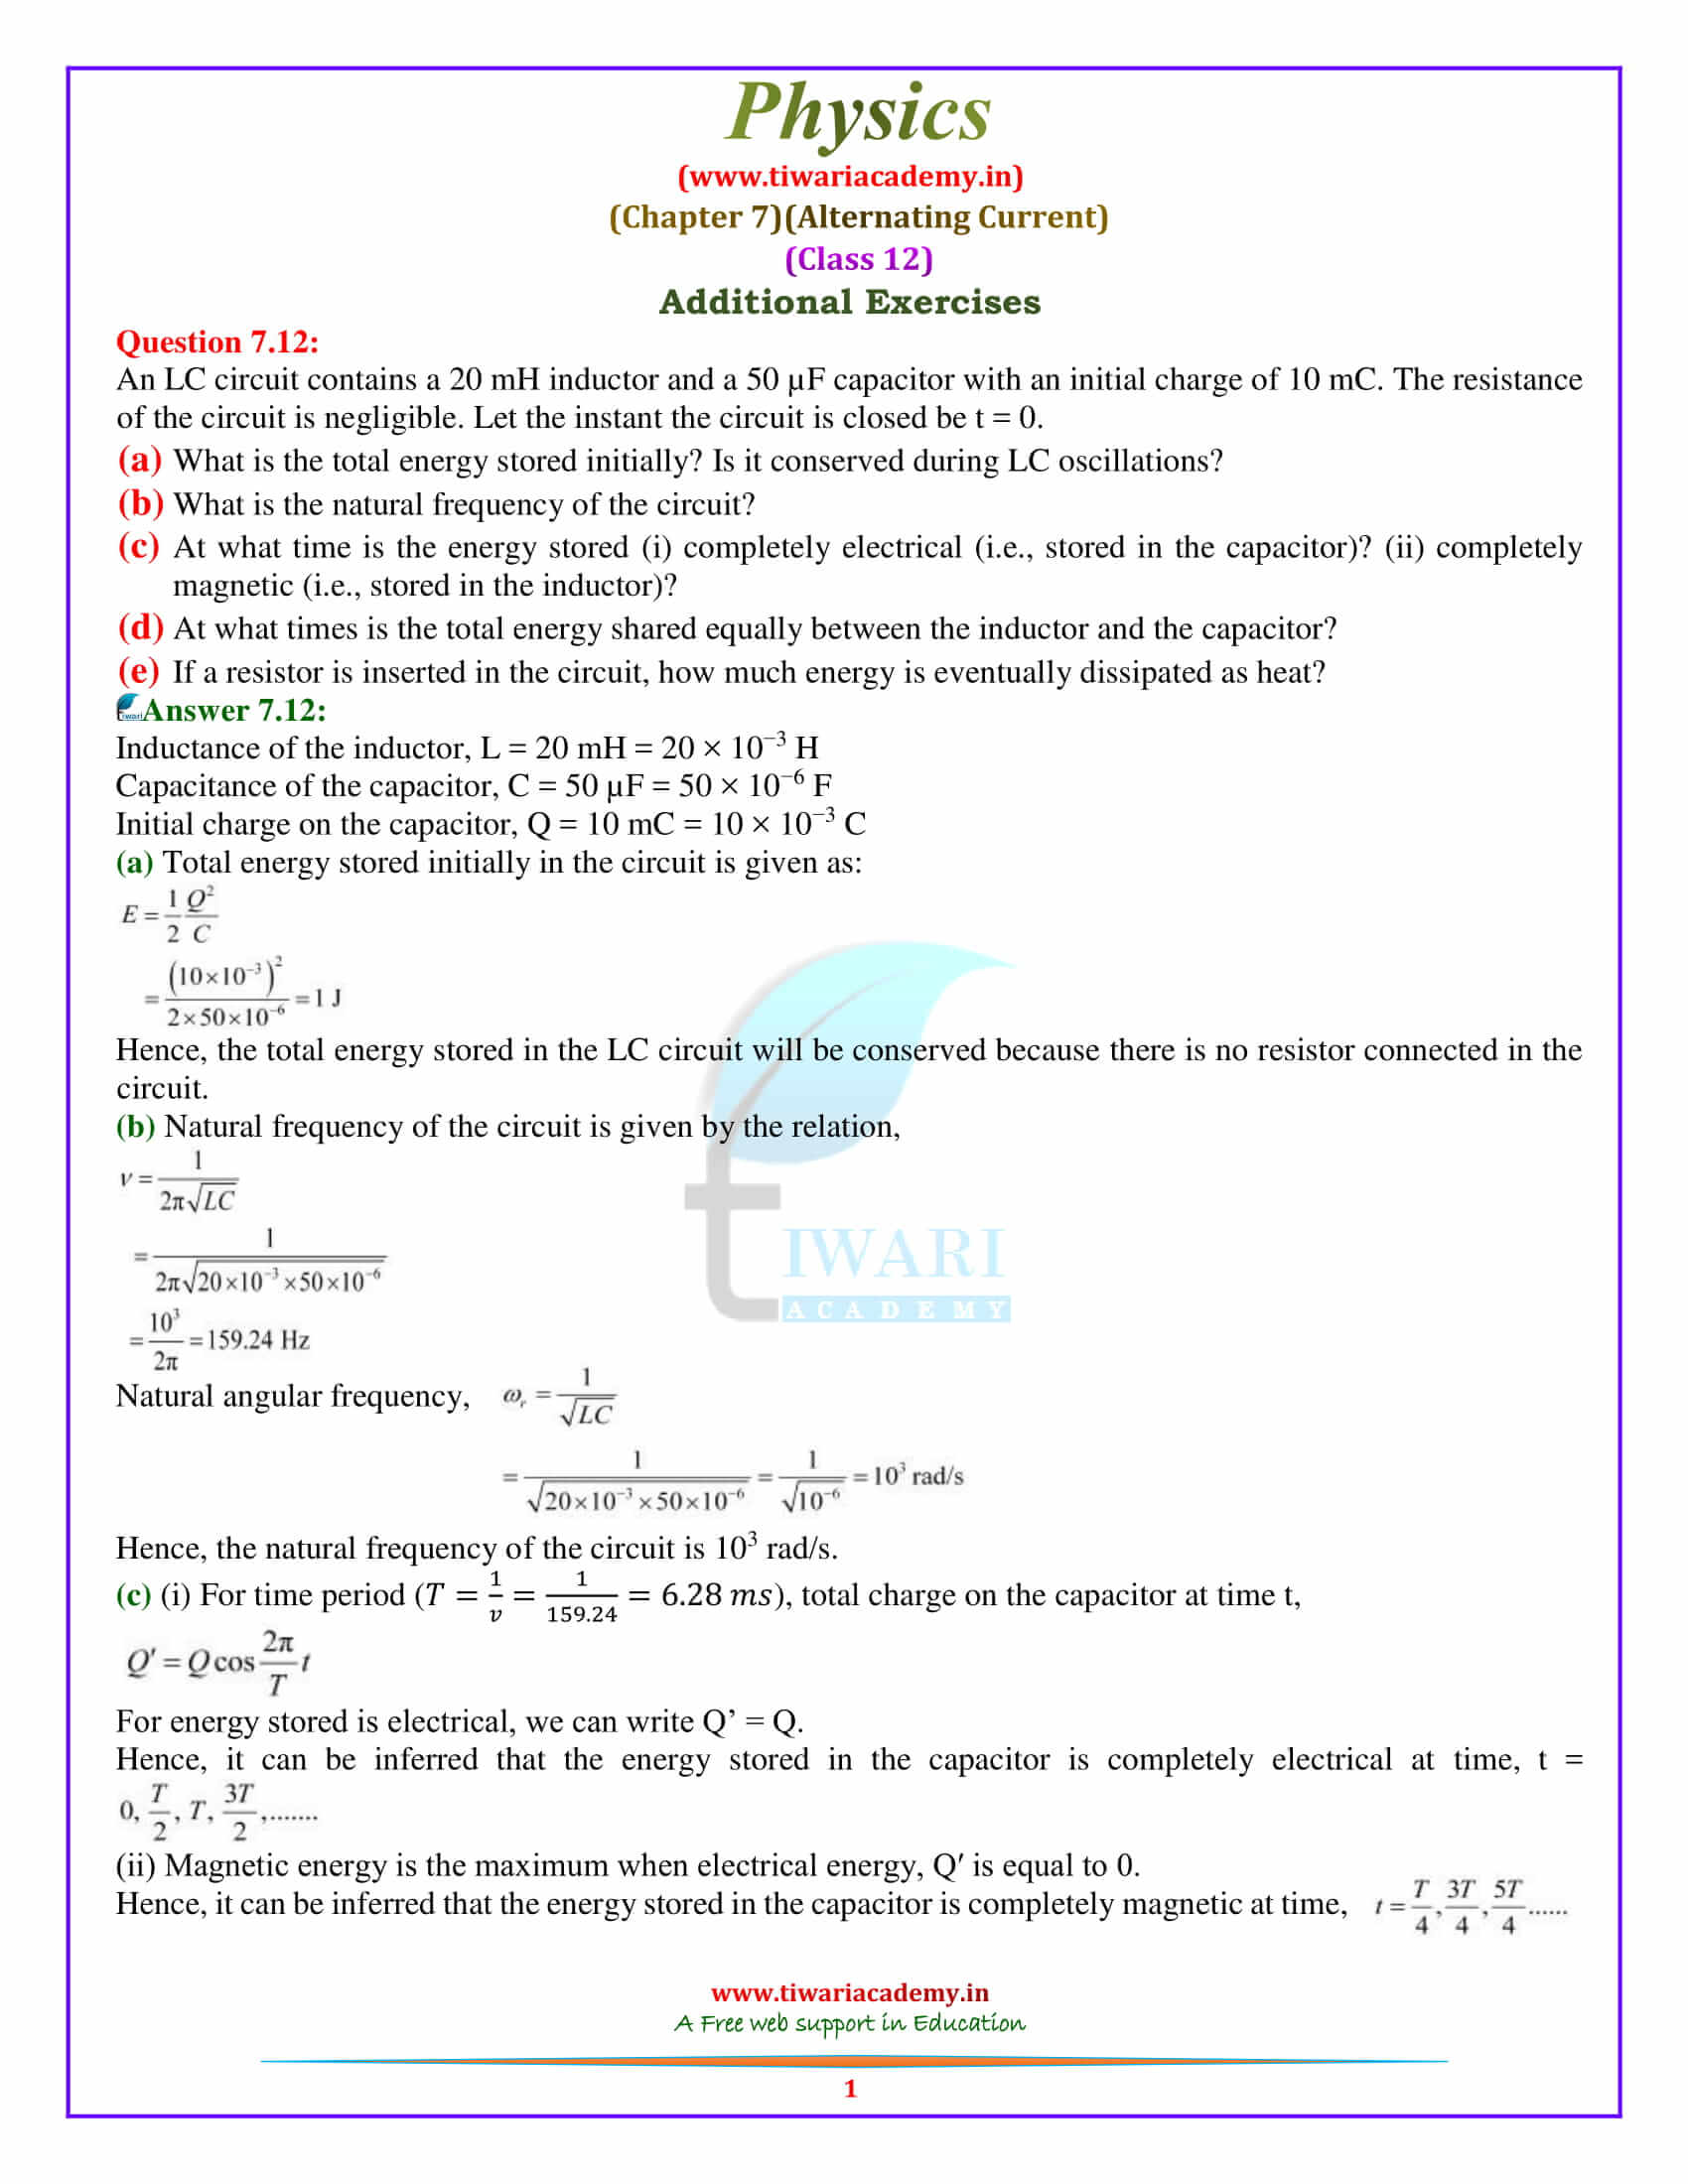 12 Physics Chapter 7 Alternating Current additional exercises